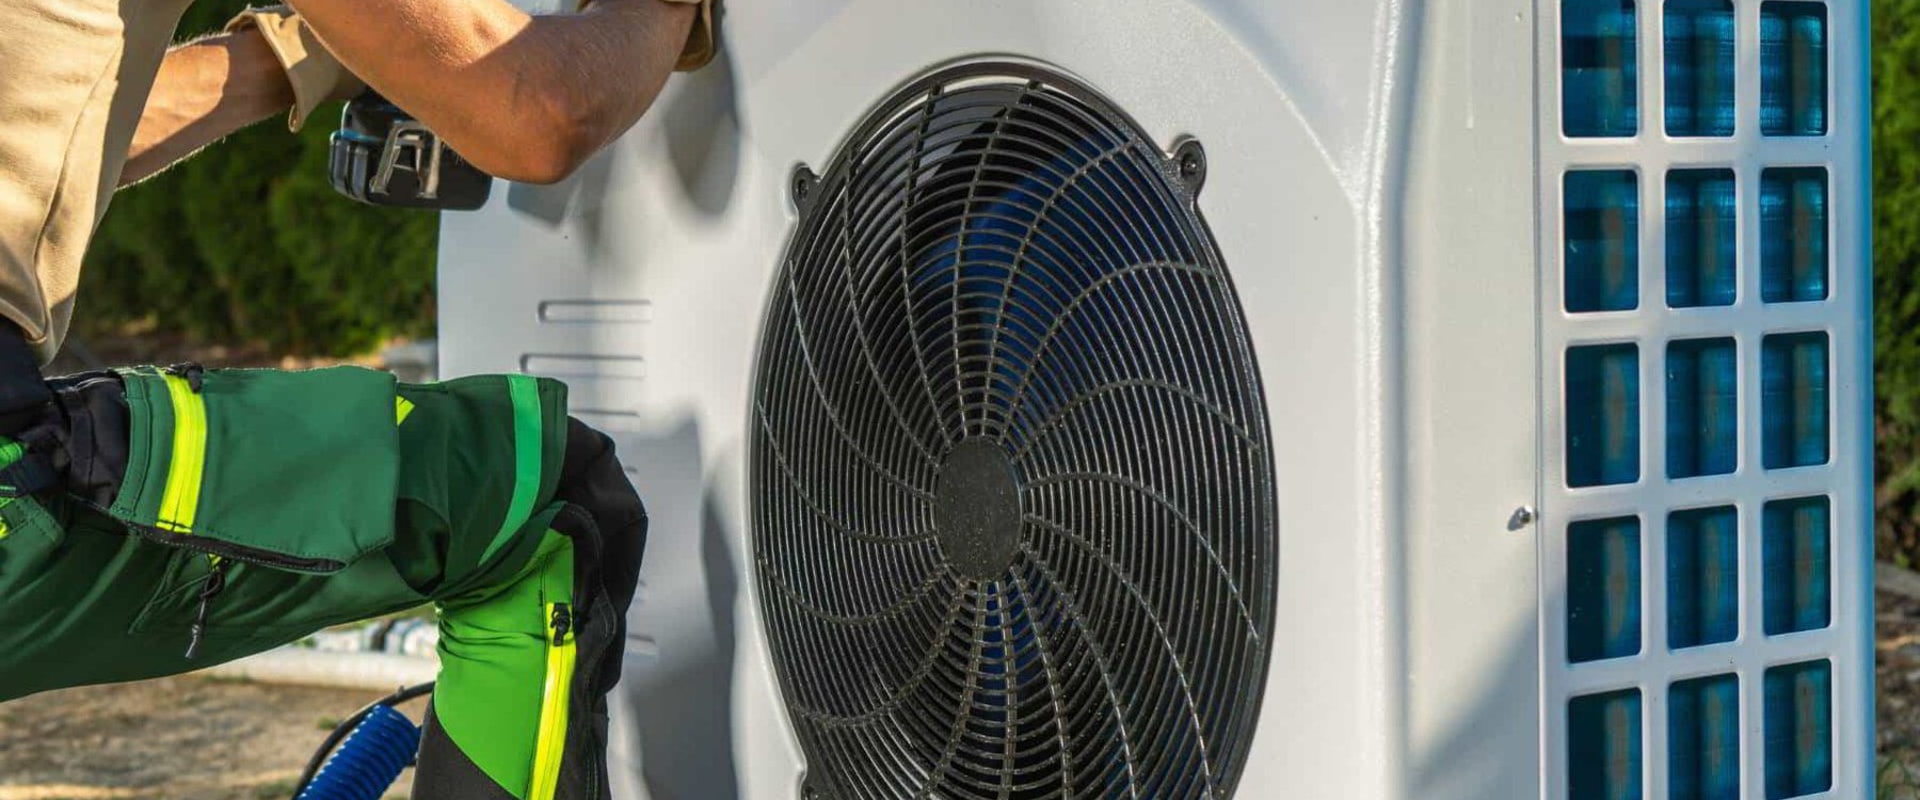 Special Considerations for Newer Systems When Getting an HVAC Tune Up in Florida